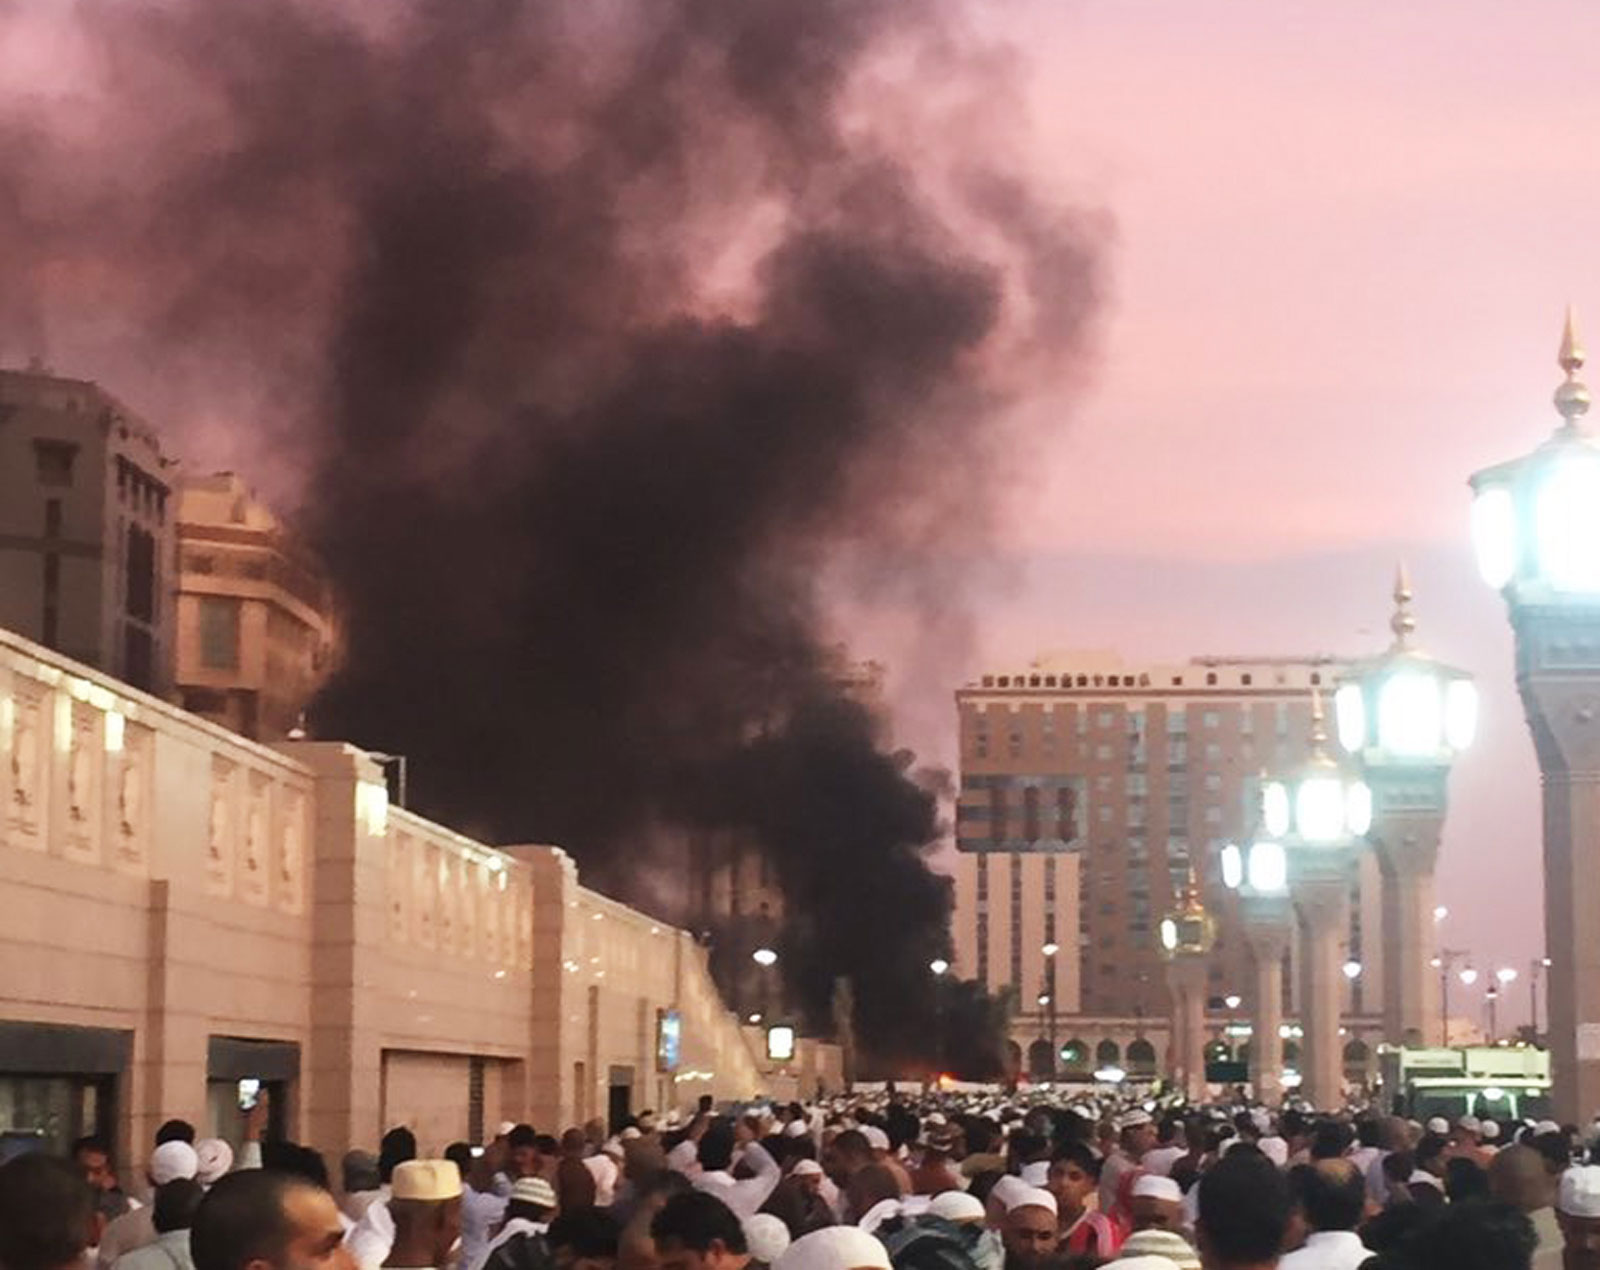 Smoke from a bomb attack near the Mosque of the Prophet, Medina, Saudi Arabia, July 4, 2016